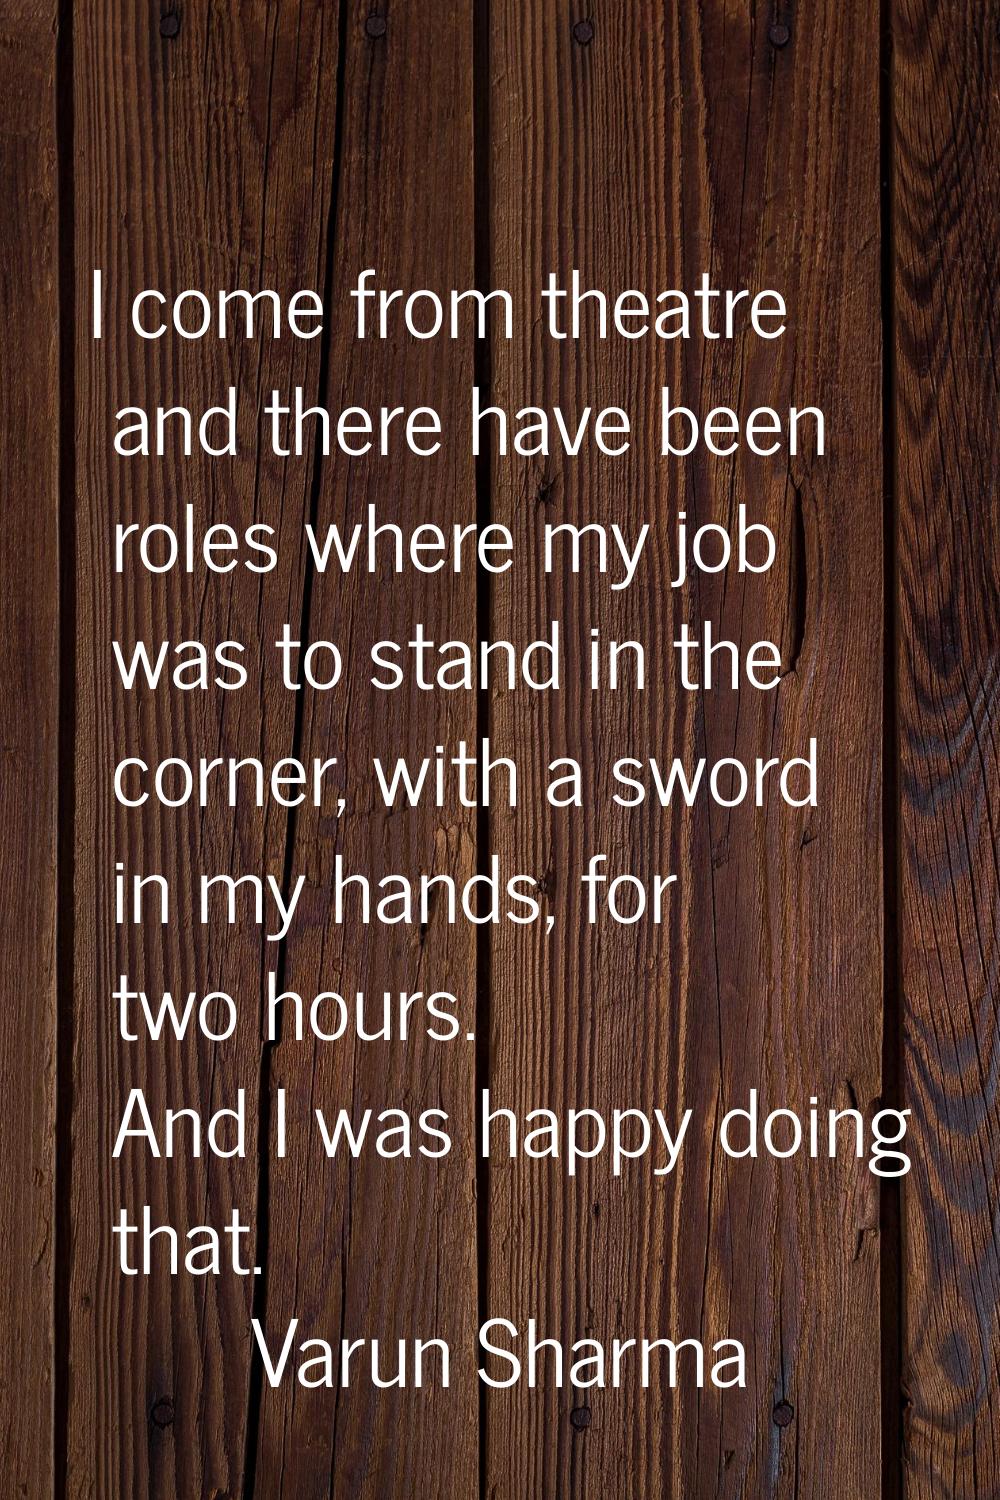 I come from theatre and there have been roles where my job was to stand in the corner, with a sword